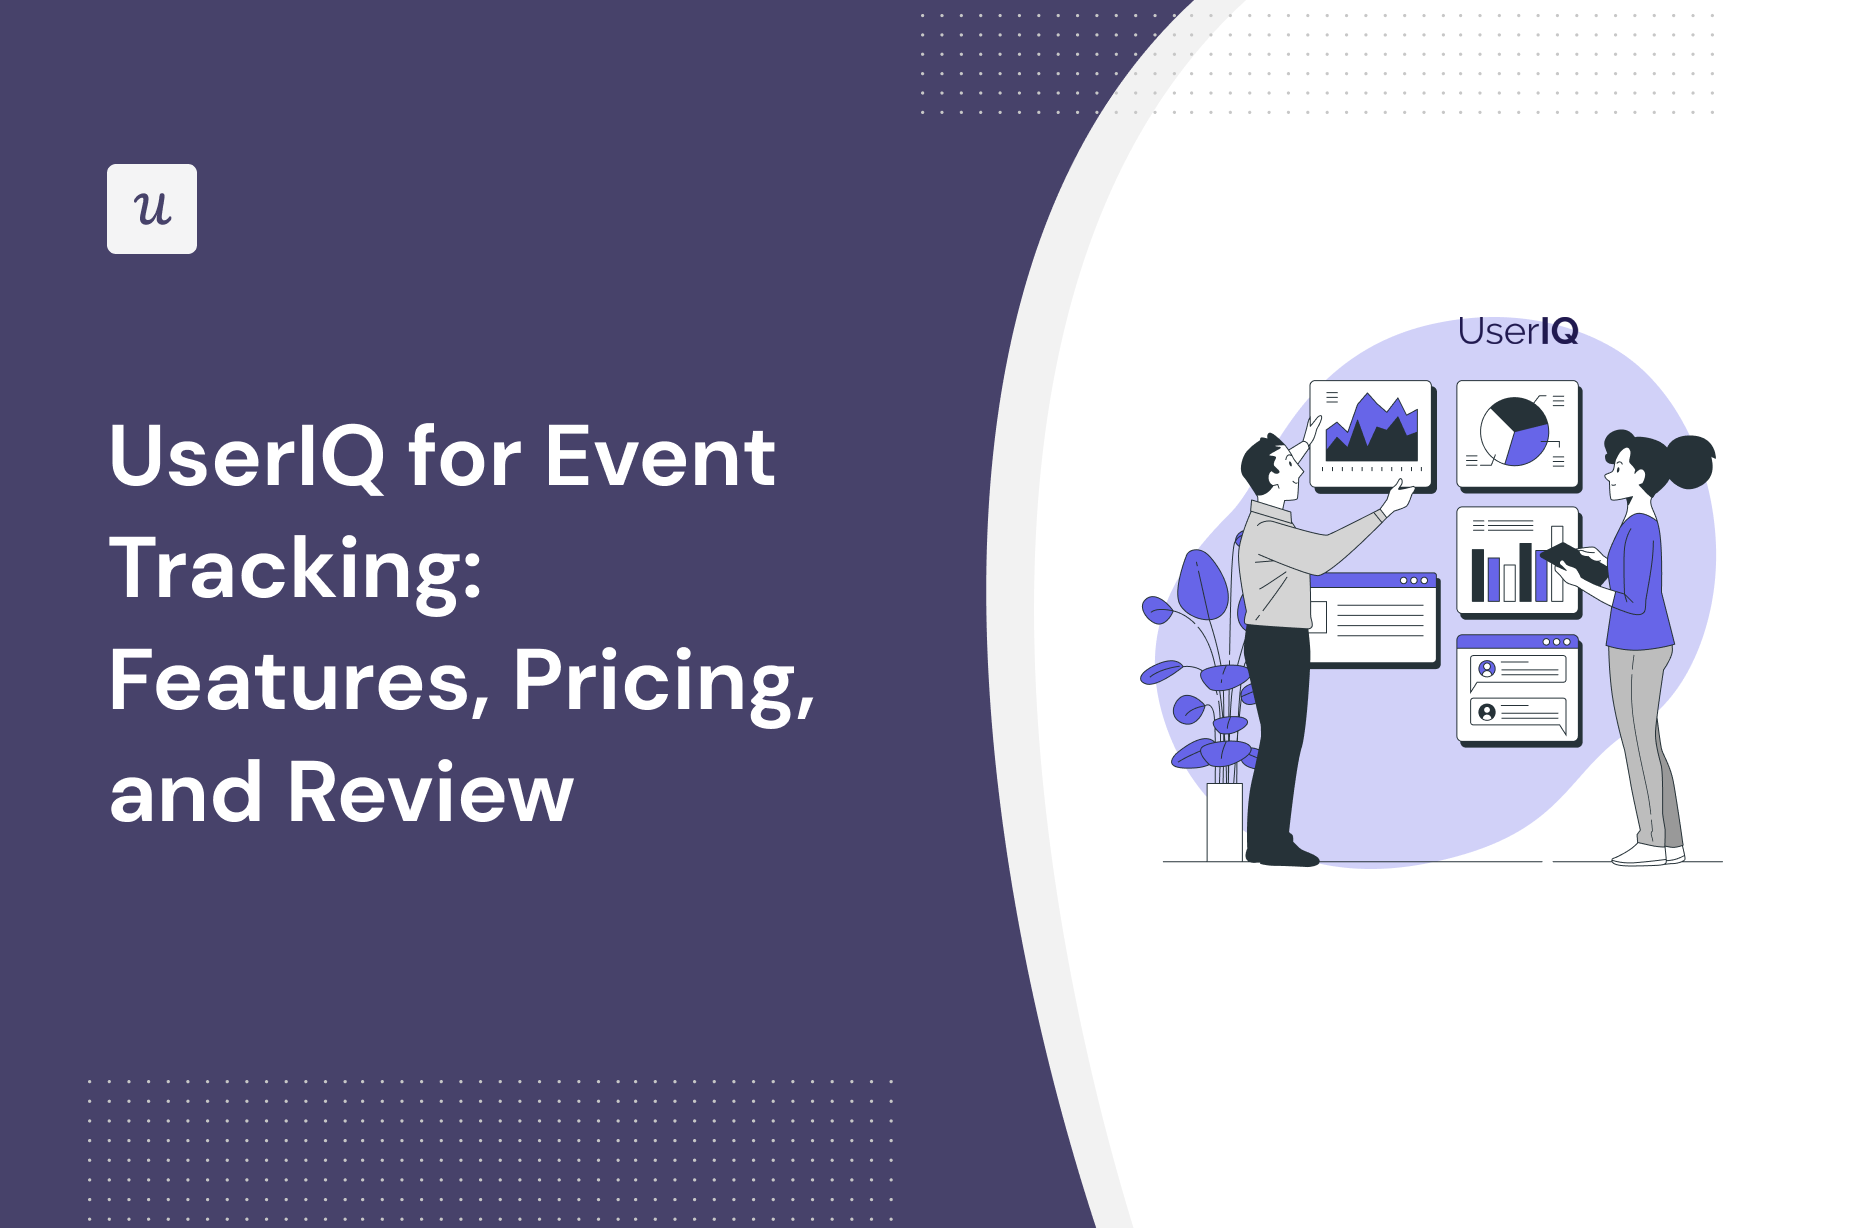 UserIQ for Event Tracking: Features, Pricing, and Review